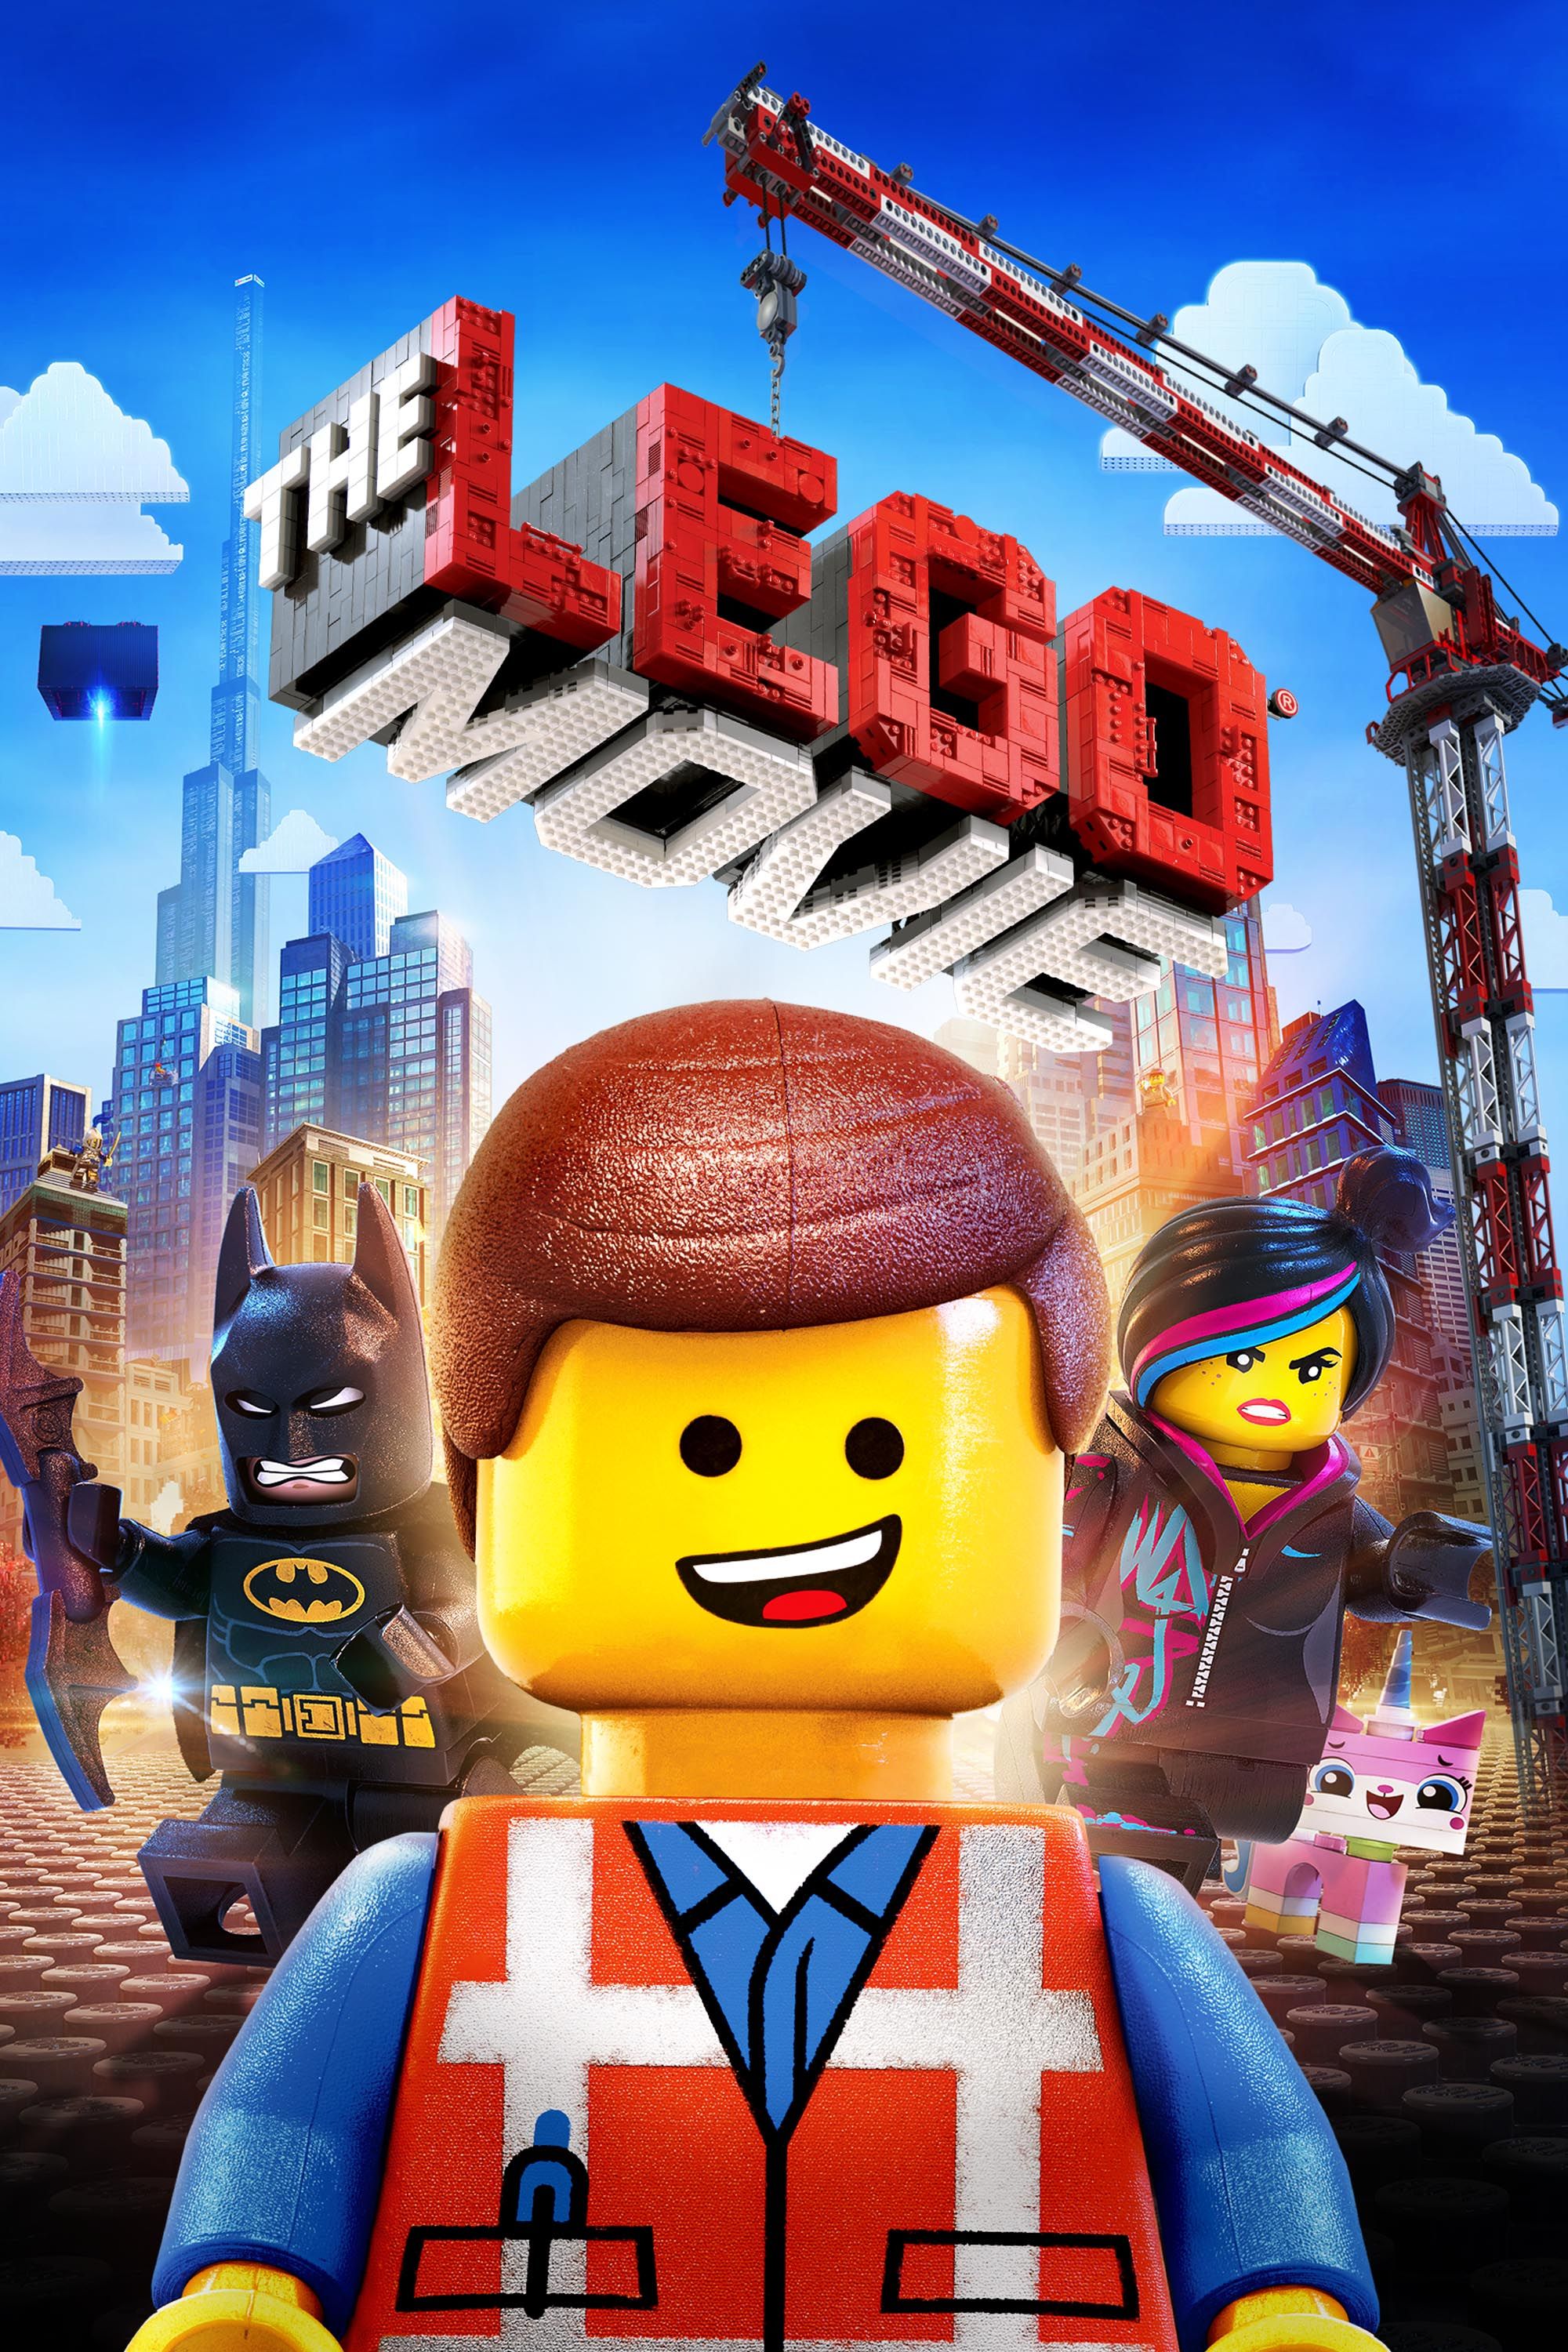 The Batman Lego Movie might be DC's chance at redemption after